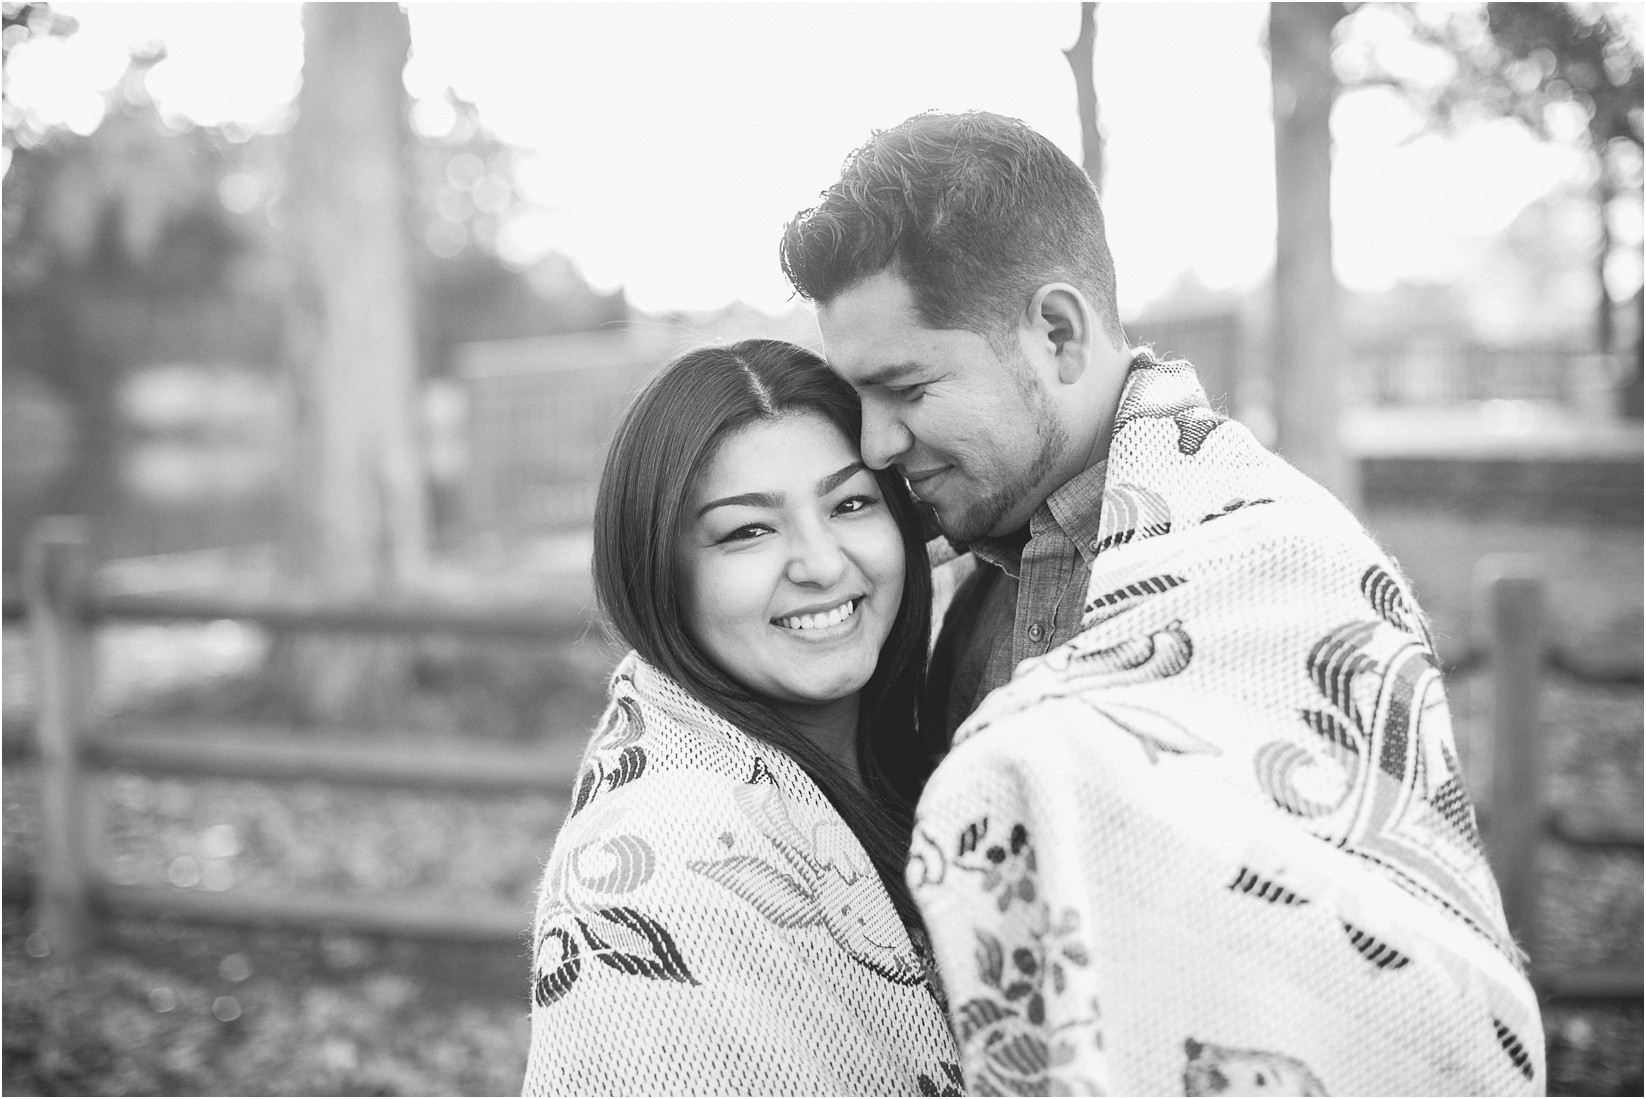 Cuddled and wrapped up in a blanket during the Mcdowell Nature Preserve Engagement Session near lake Wylie north carolina